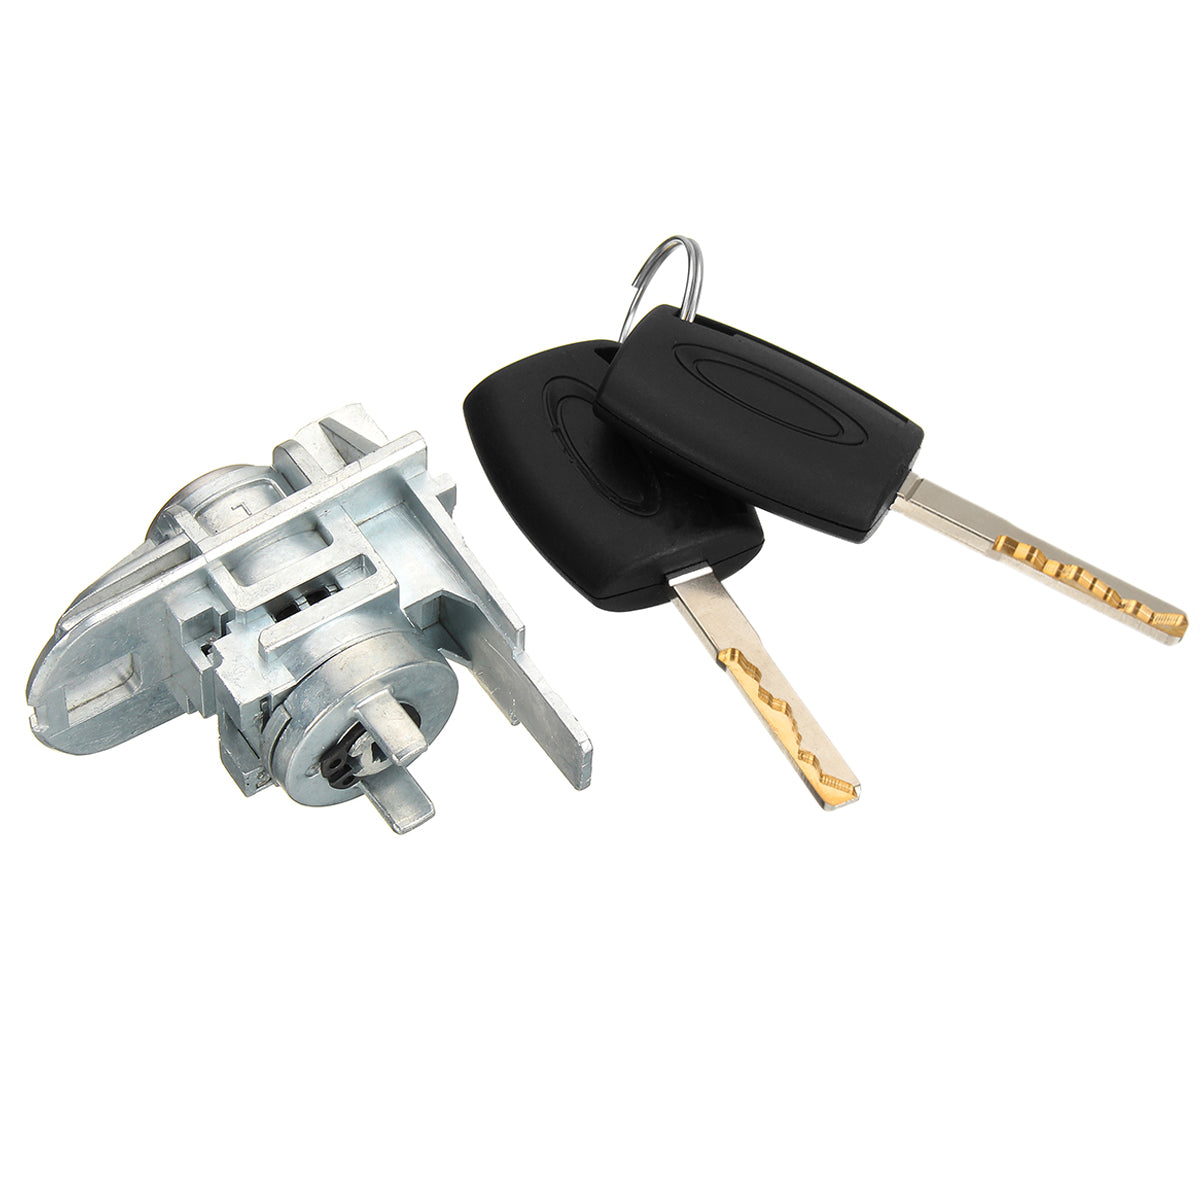 Dark Slate Gray Car Front Door Lock Replacement w/ 2 Key for Ford Focus C-Max S-Max 1552849